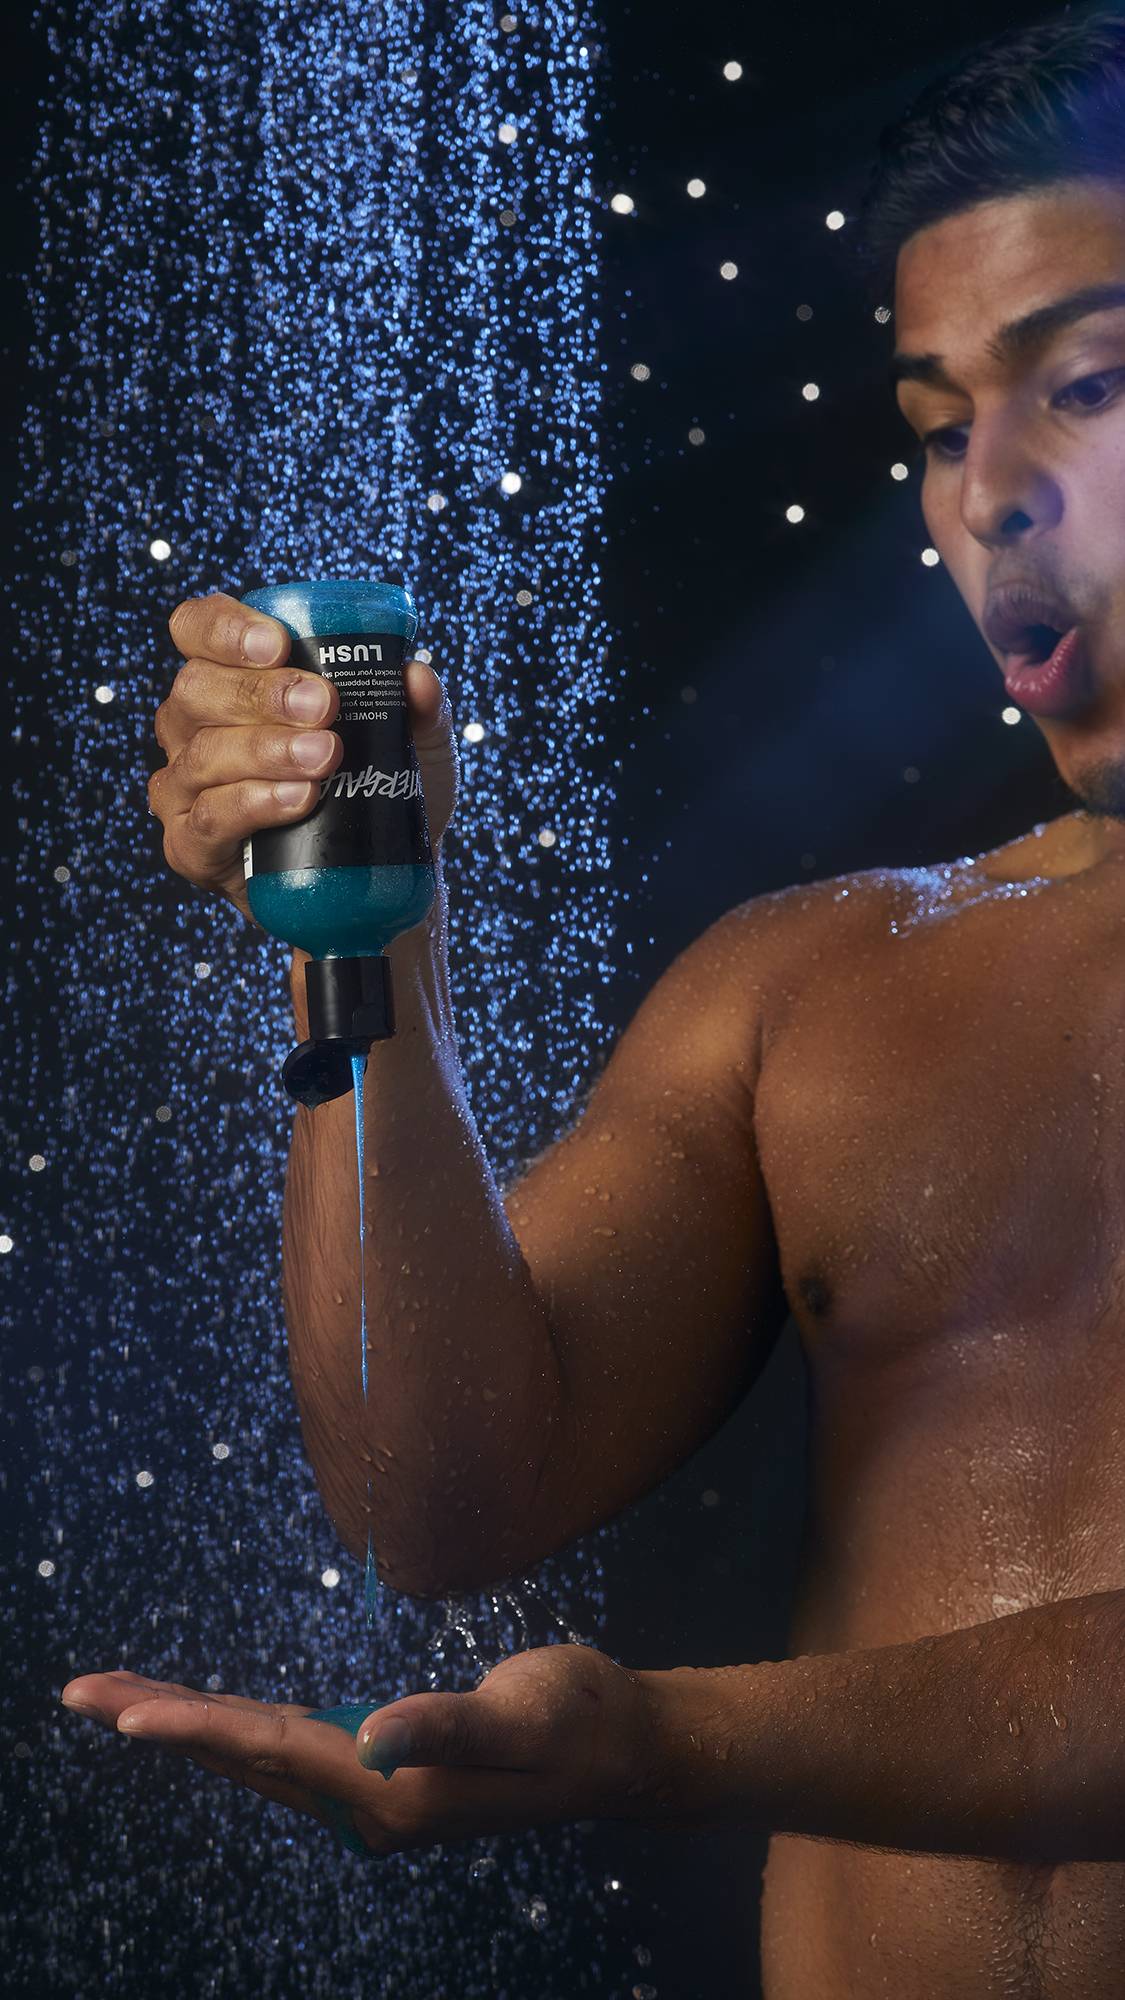 Image shows the model in the shower squeezing the Intergalactic shower gel into their hand with an impressed face.